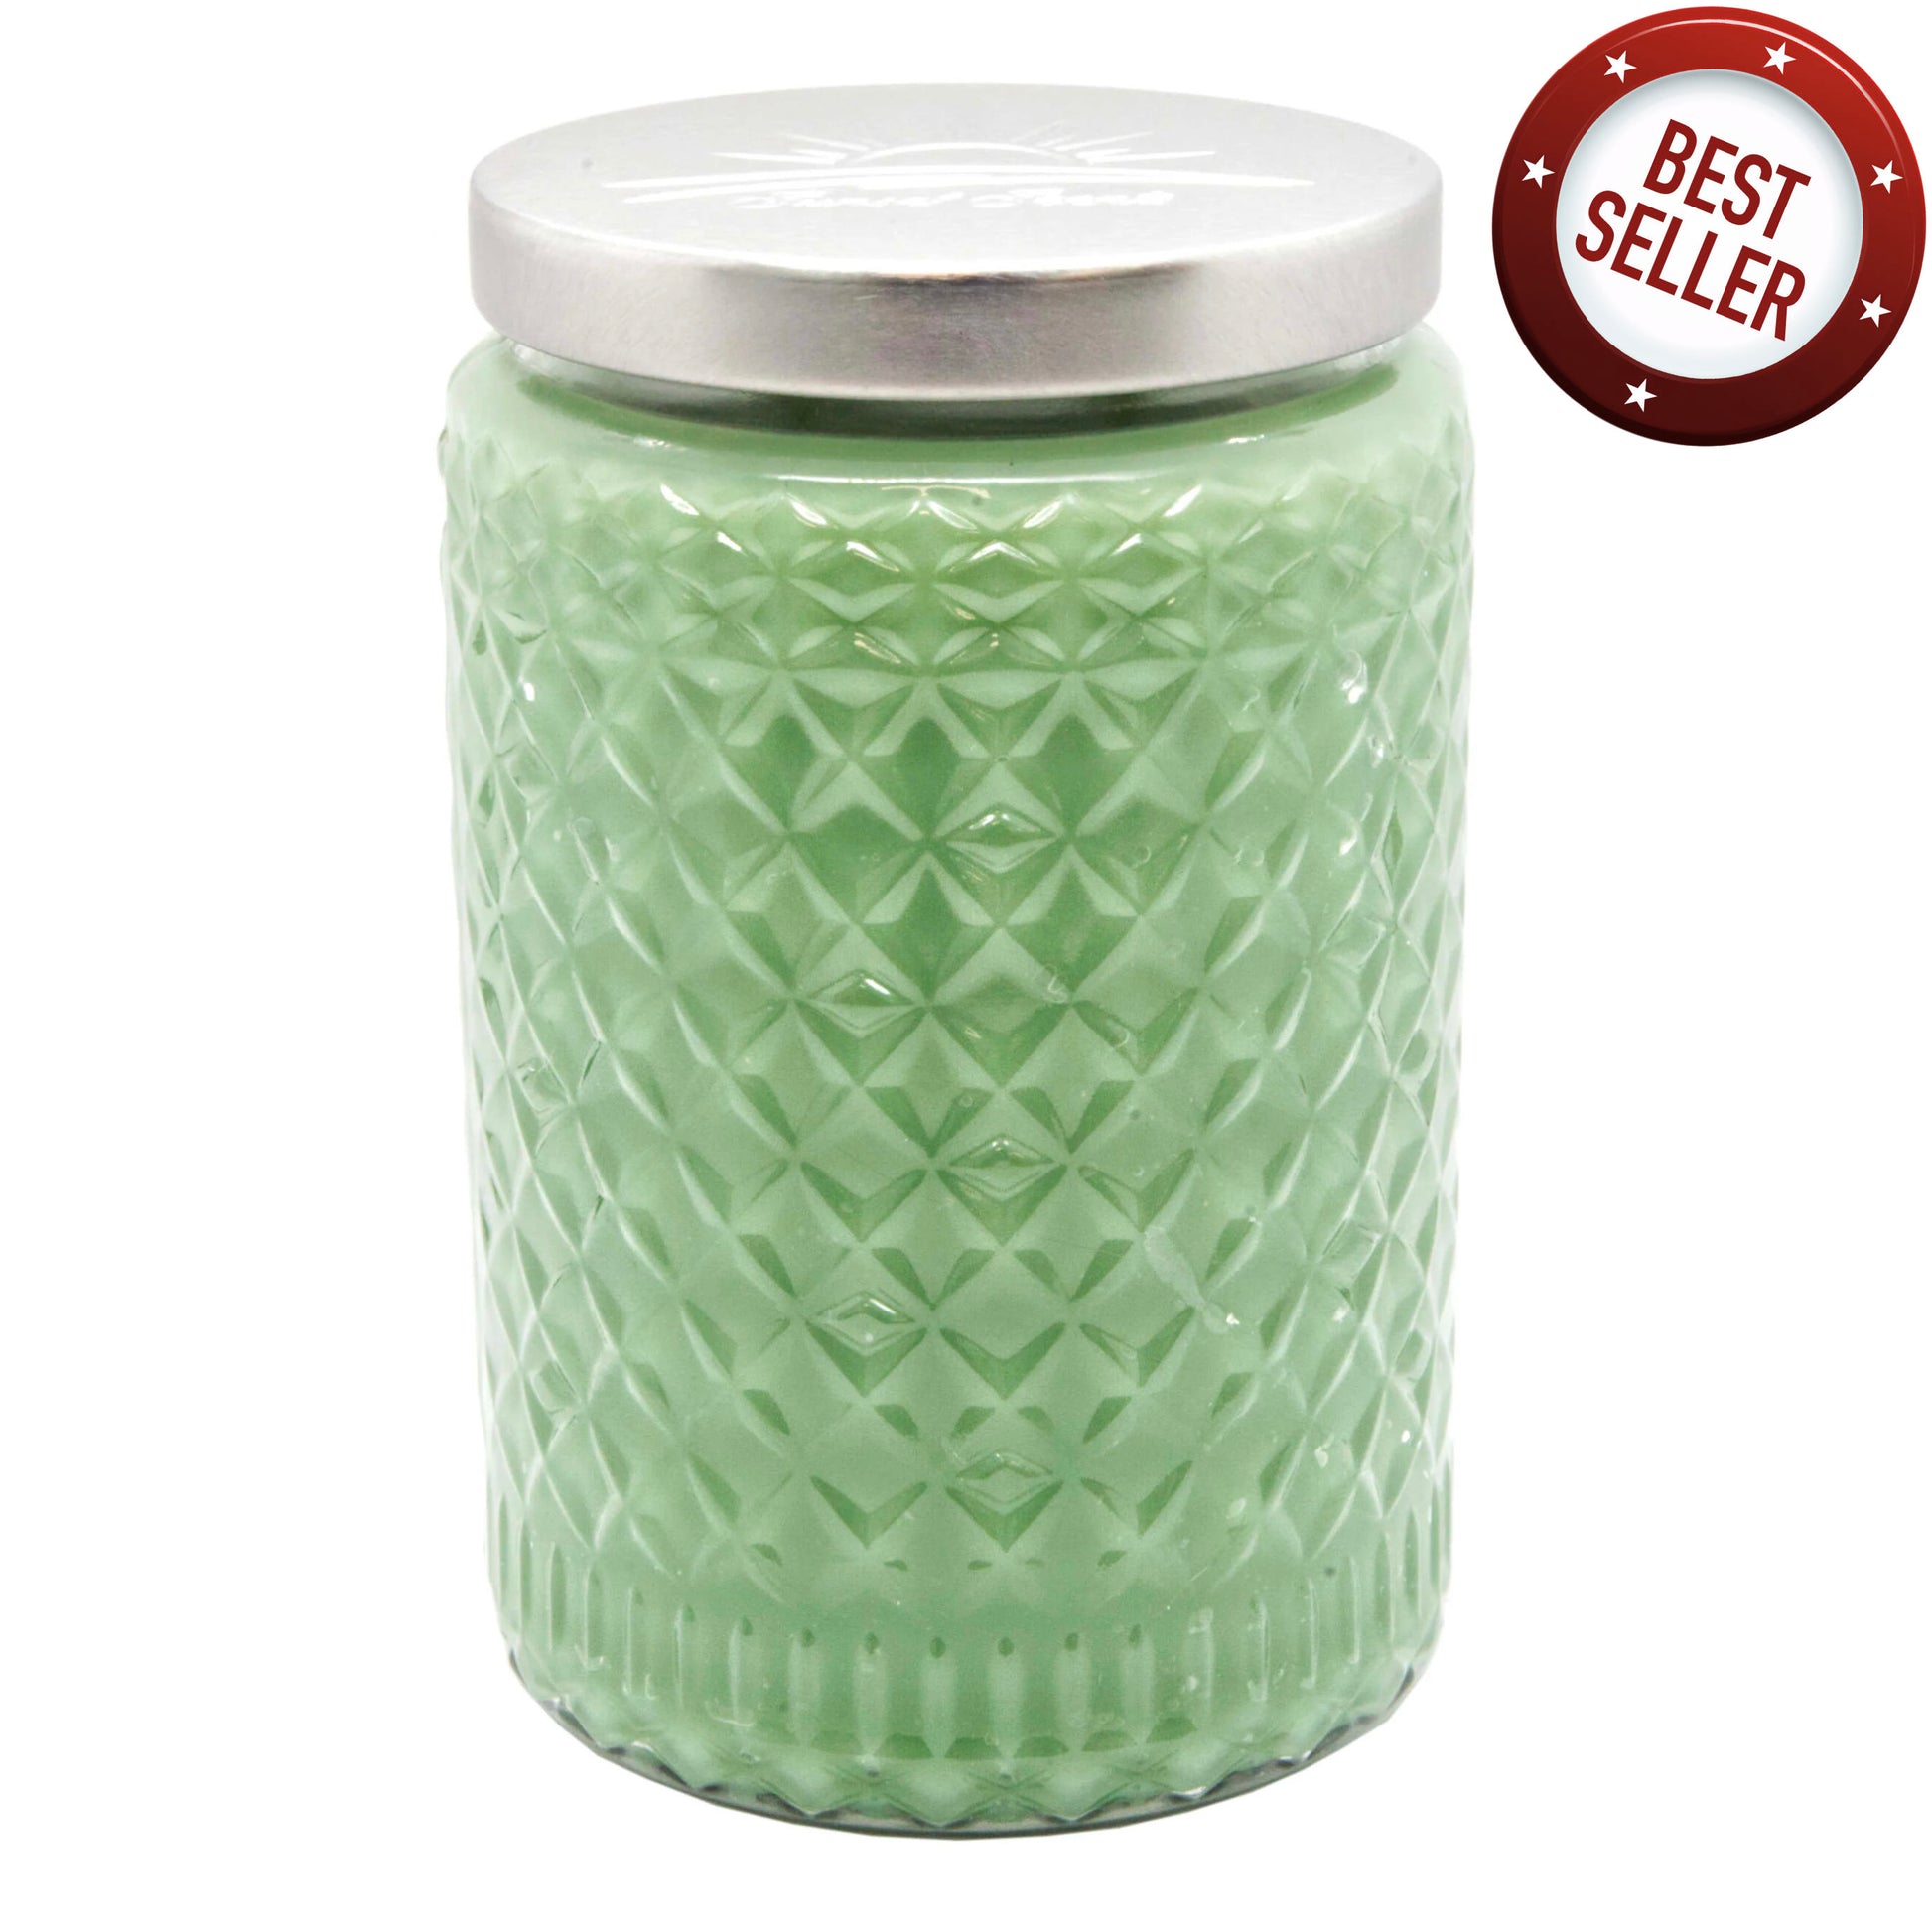 Ginger Lime Scented Candle